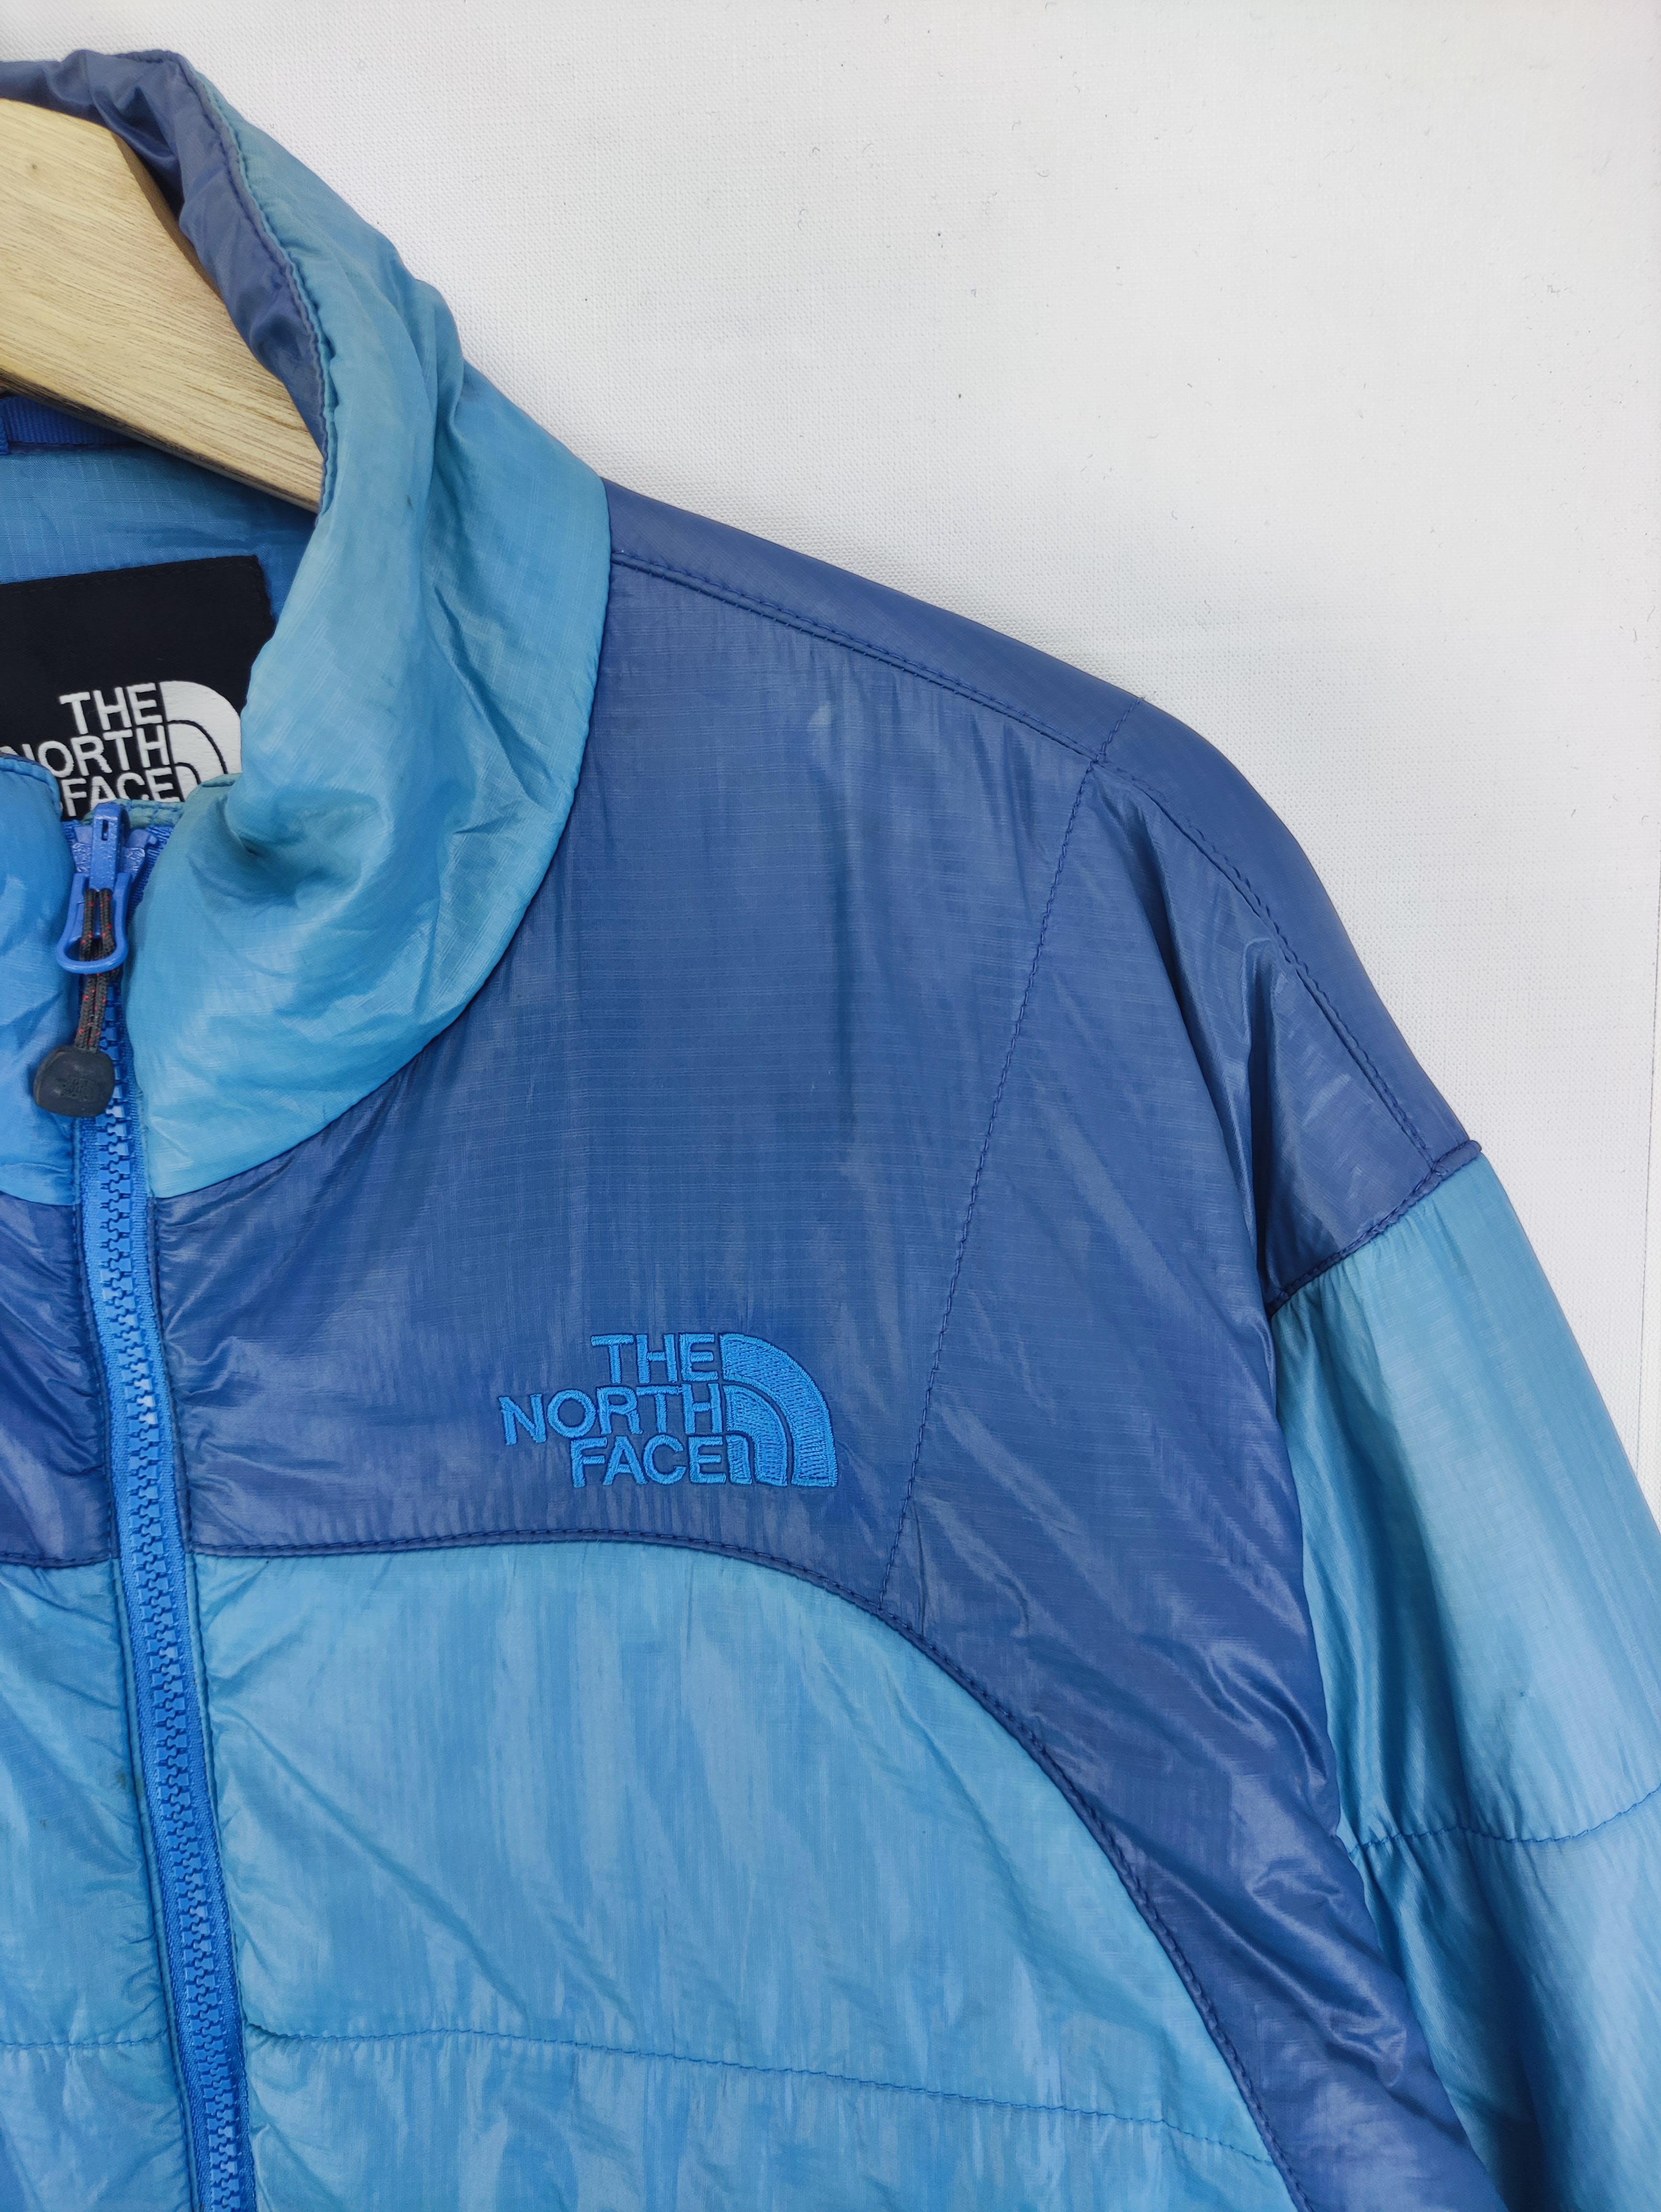 Outdoor Style Go Out! - The North Face Jacket Zipper - 2